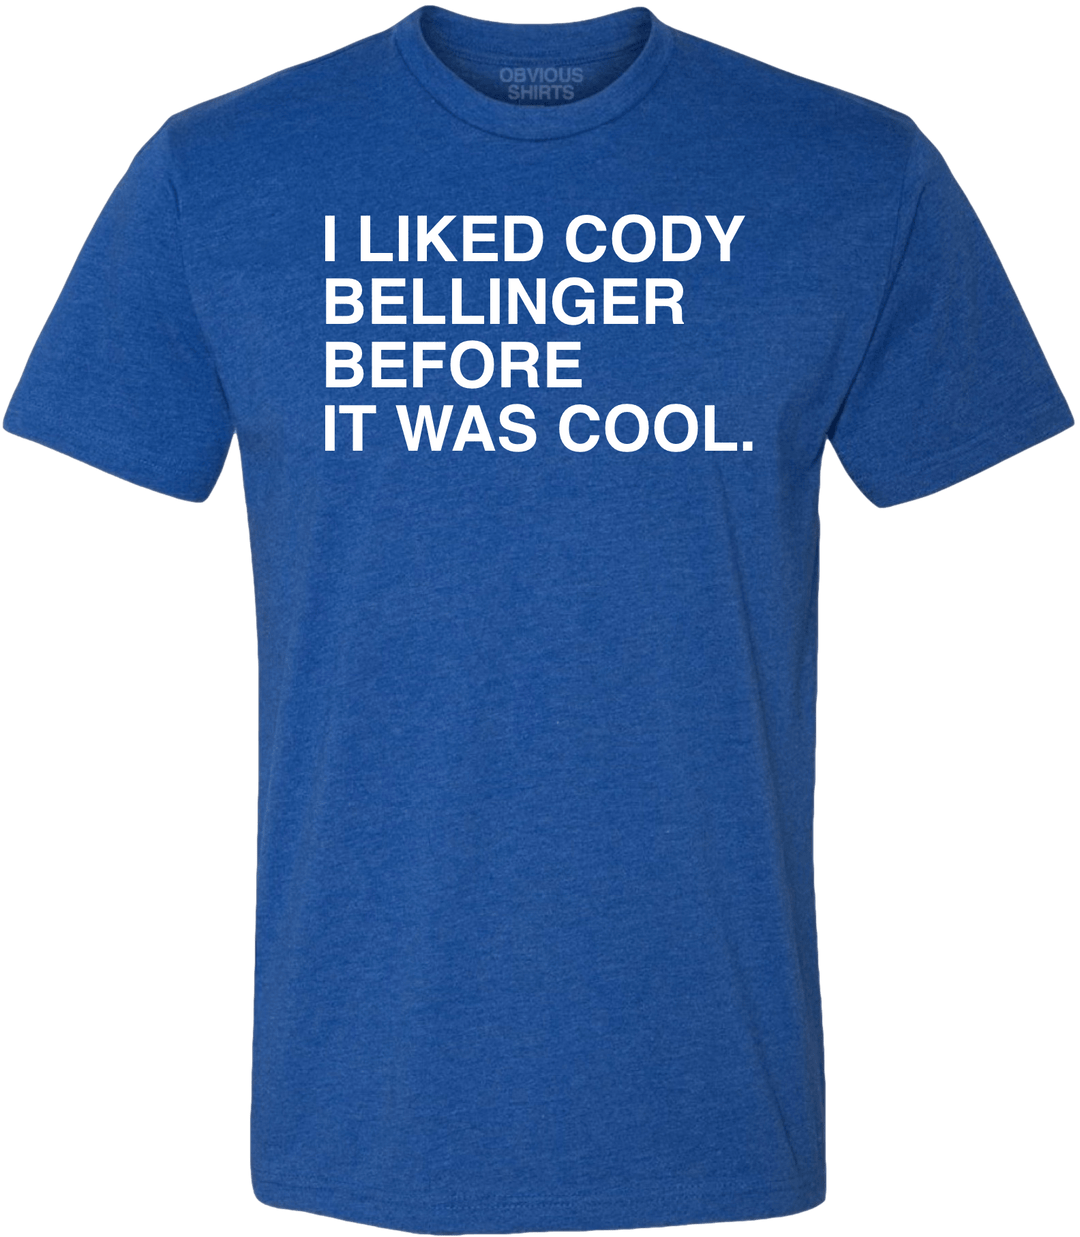 I LIKED CODY BELLINGER BEFORE IT WAS COOL. - OBVIOUS SHIRTS